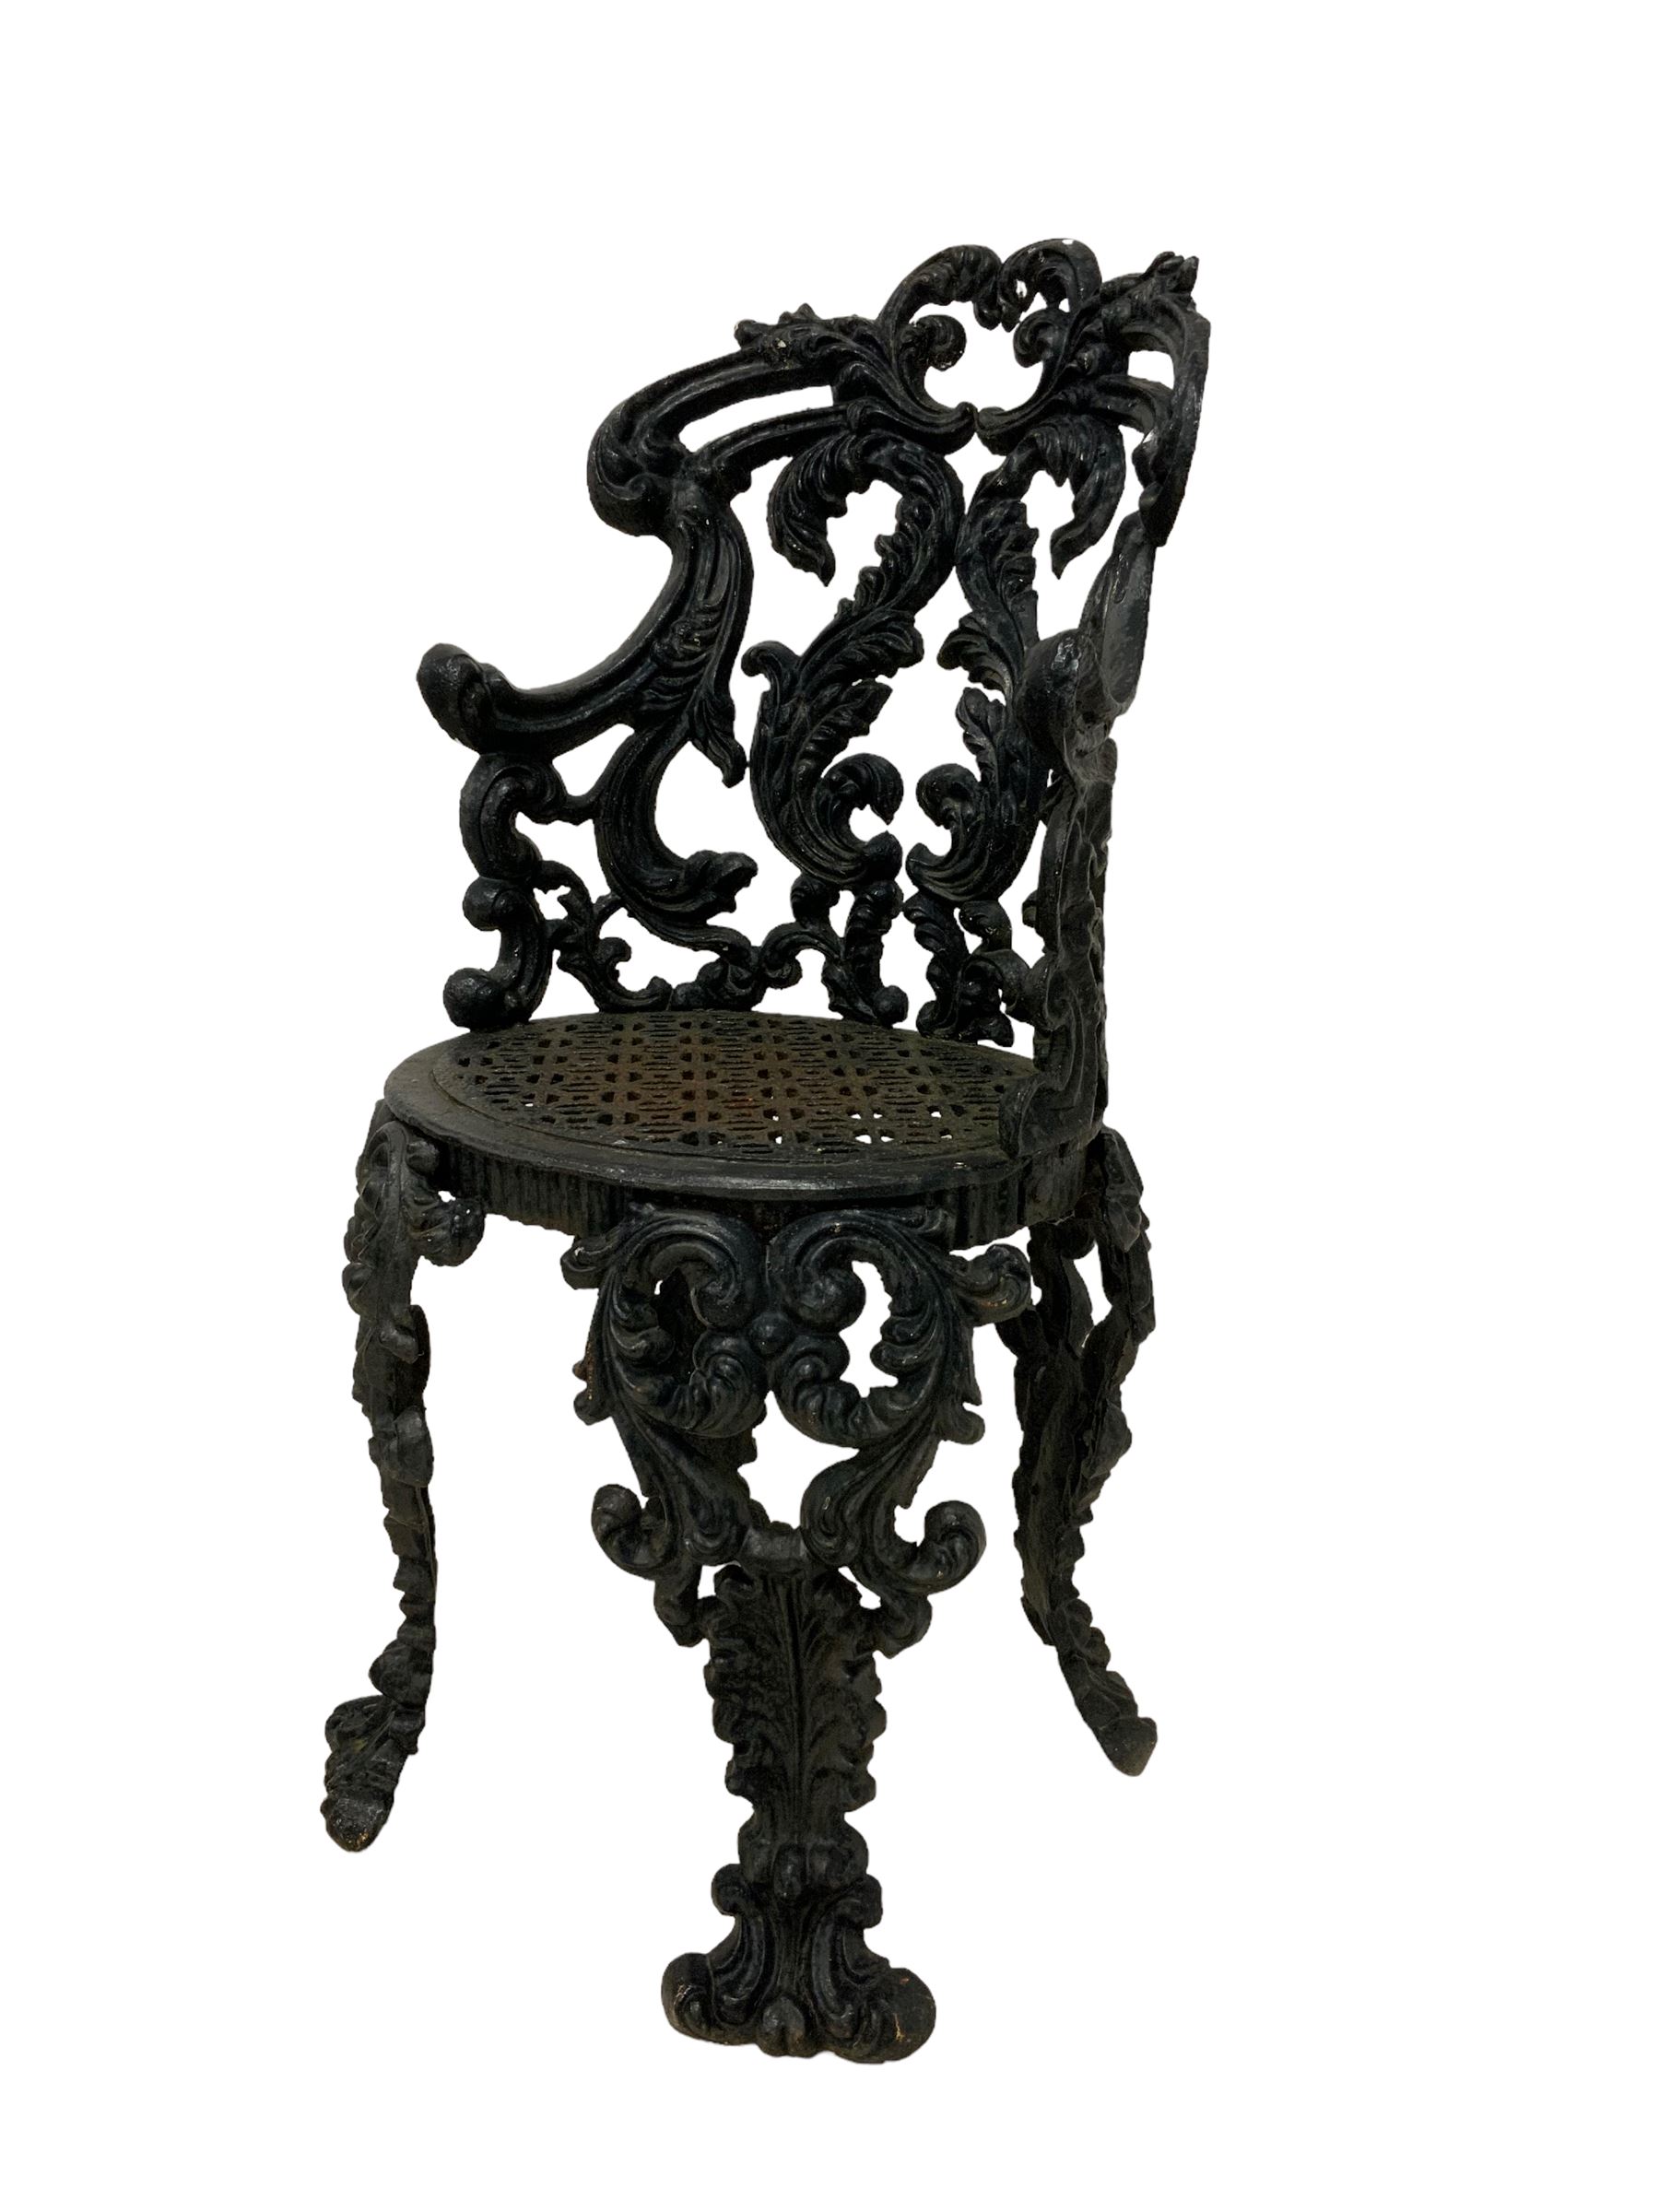 Late 19th century painted heavy ornate cast iron garden chair - Image 2 of 7